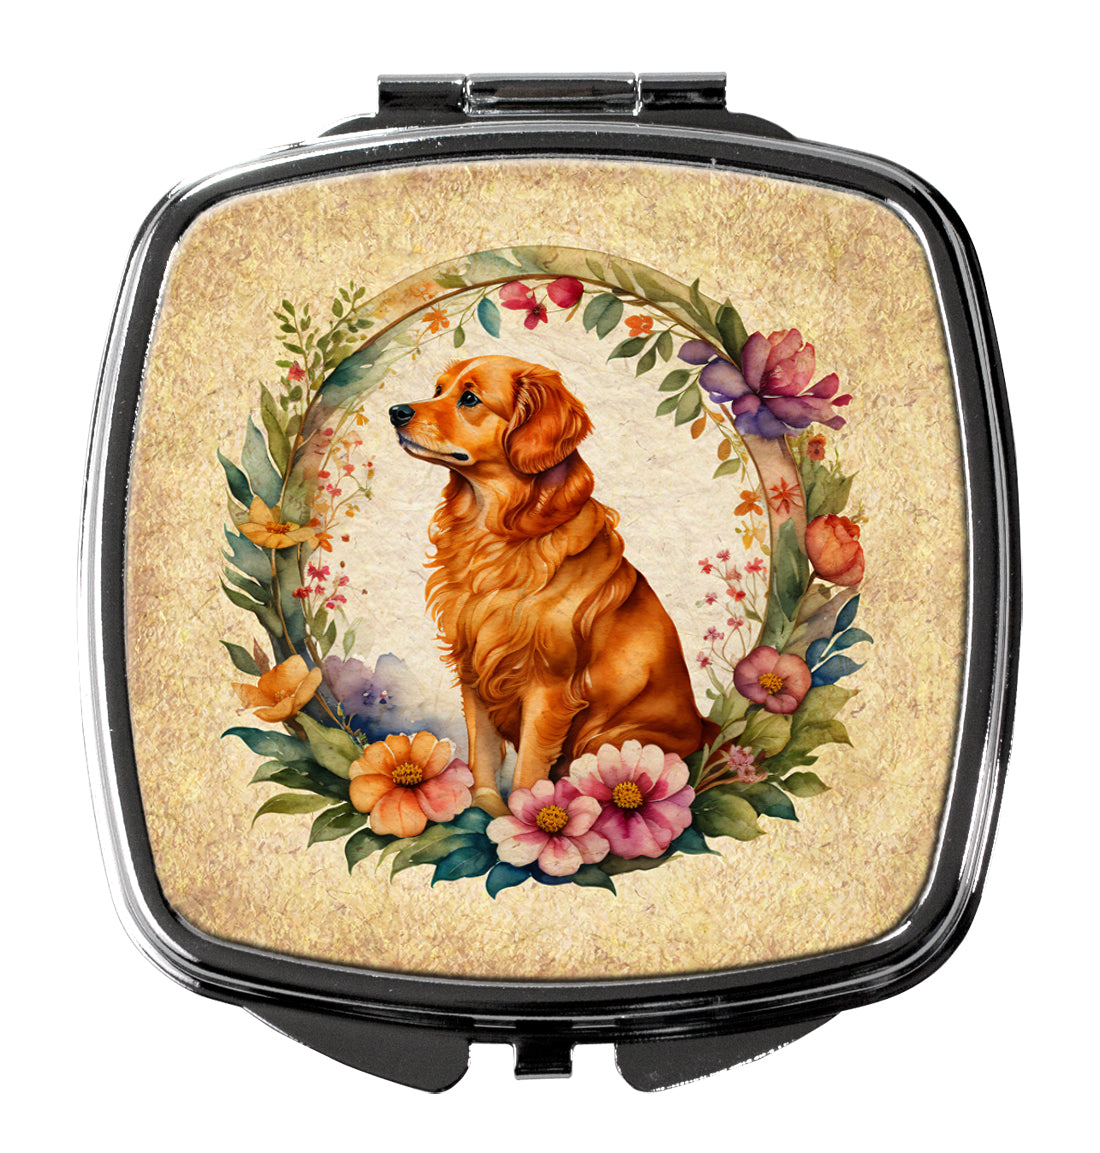 Buy this Nova Scotia Duck Tolling Retriever and Flowers Compact Mirror